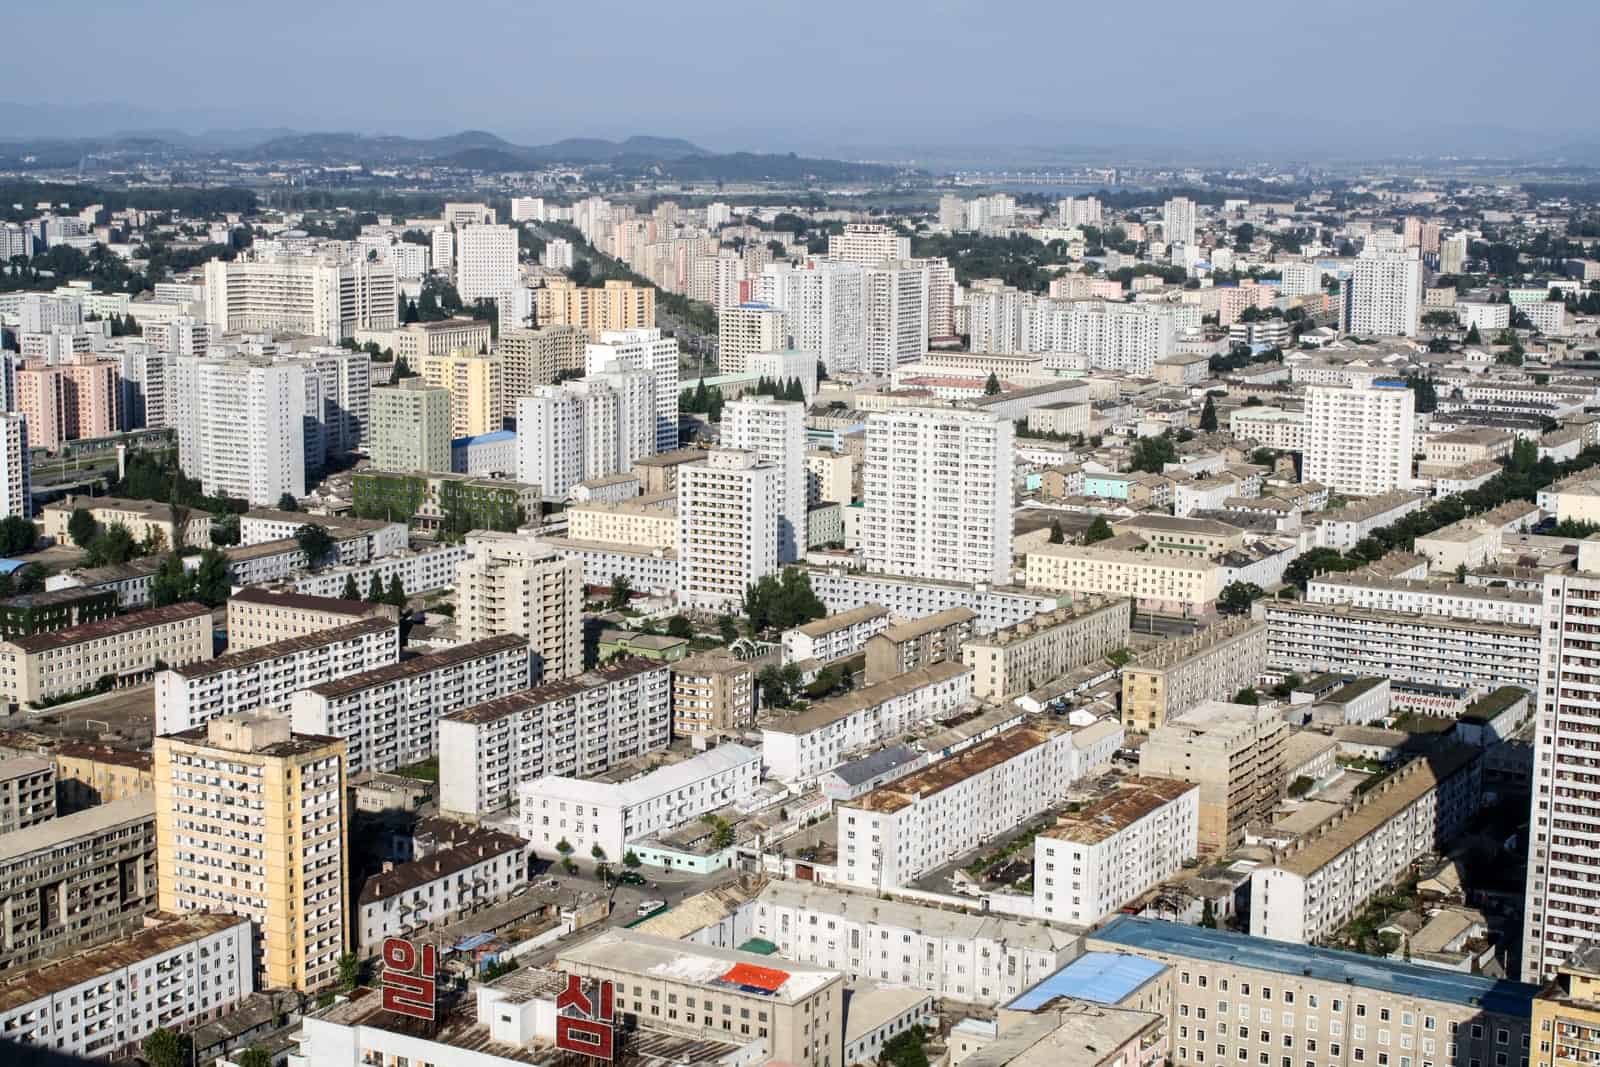 The high rise buildings of Pyongyang, the capital of North Korea